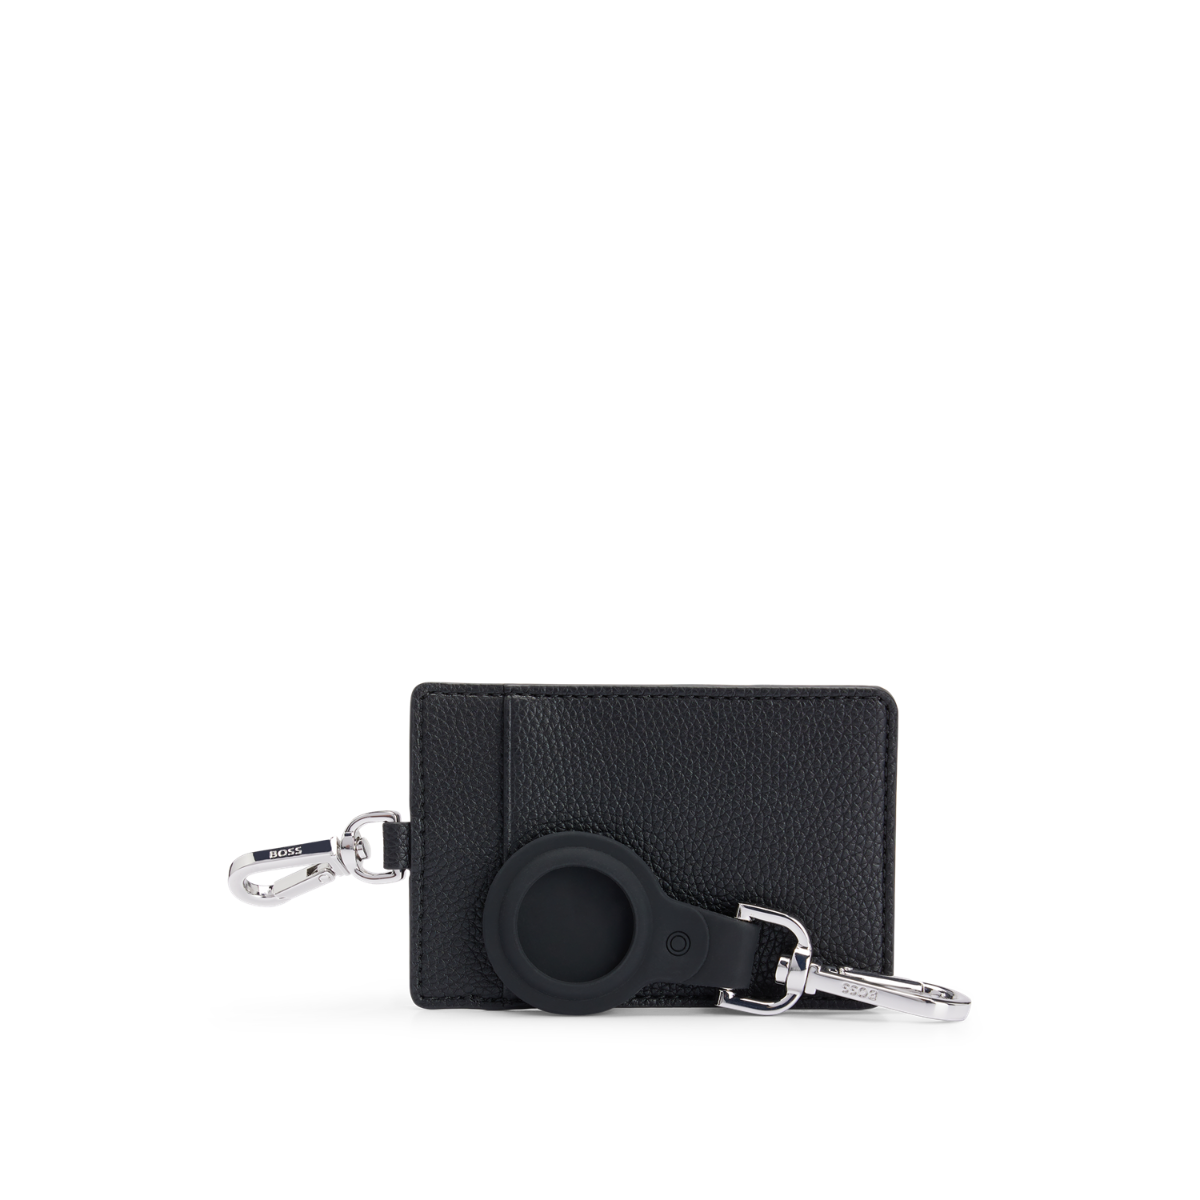 Branded card and AirTag holder gift set Black